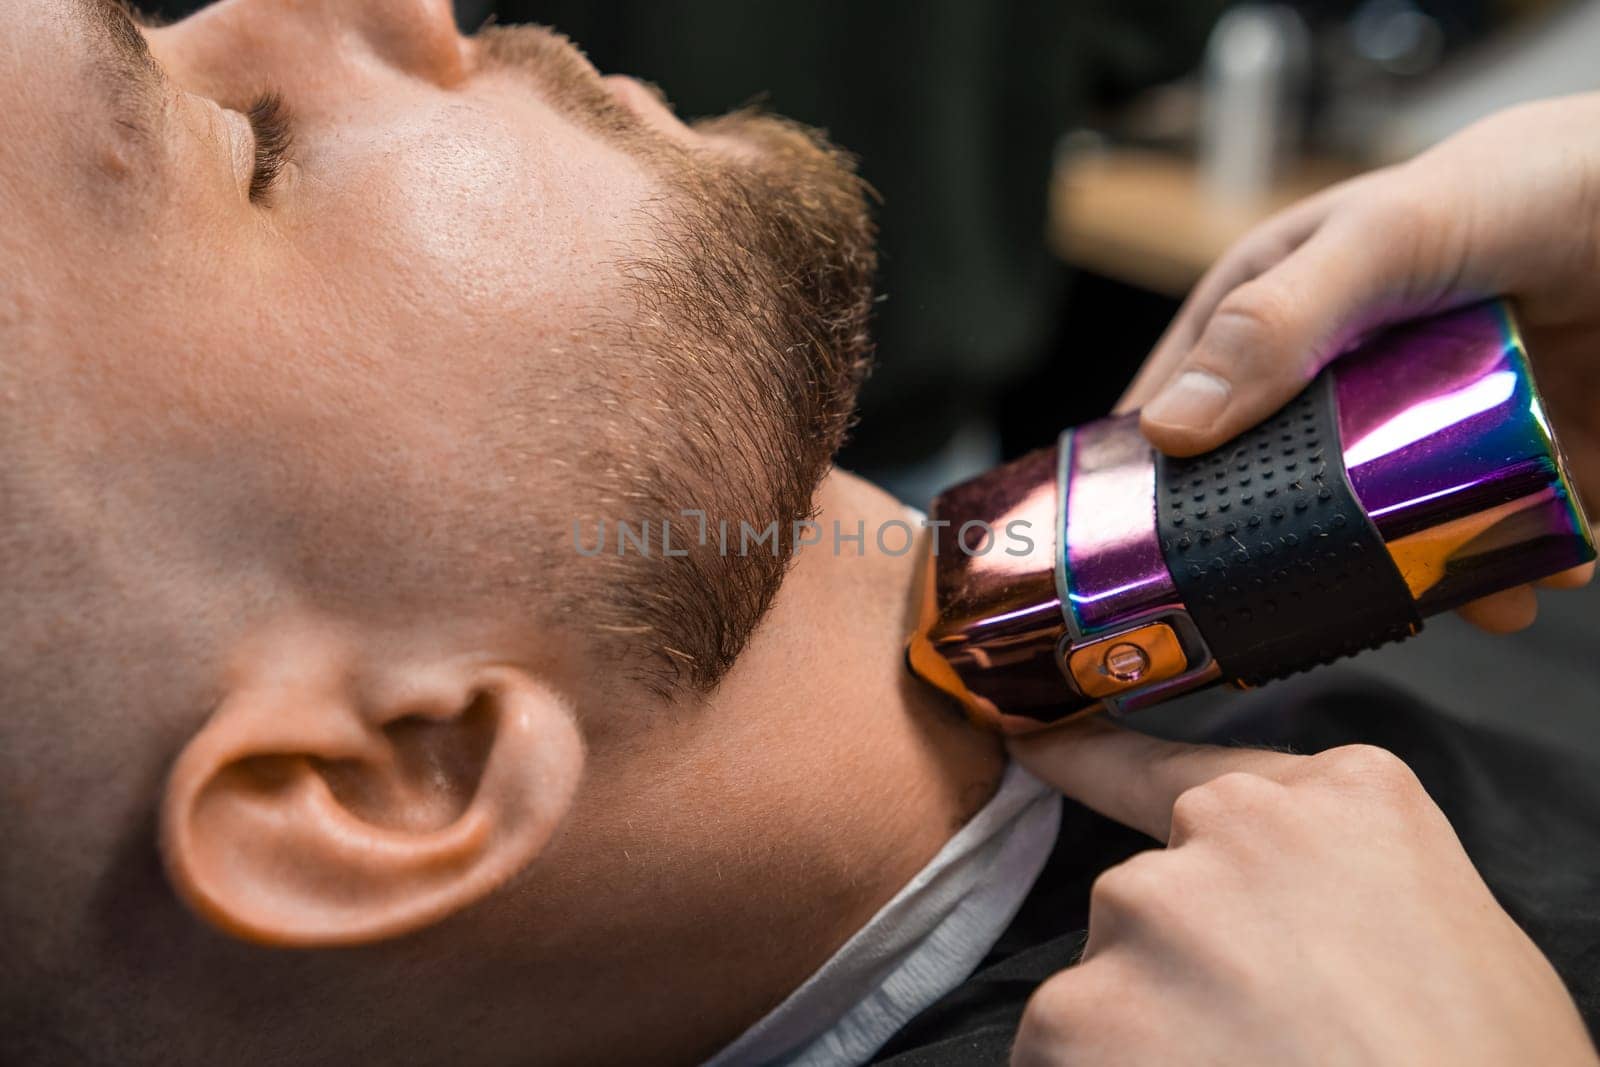 Barber employs an automatic trimmer to groom the clients beard at the barbershop by vladimka